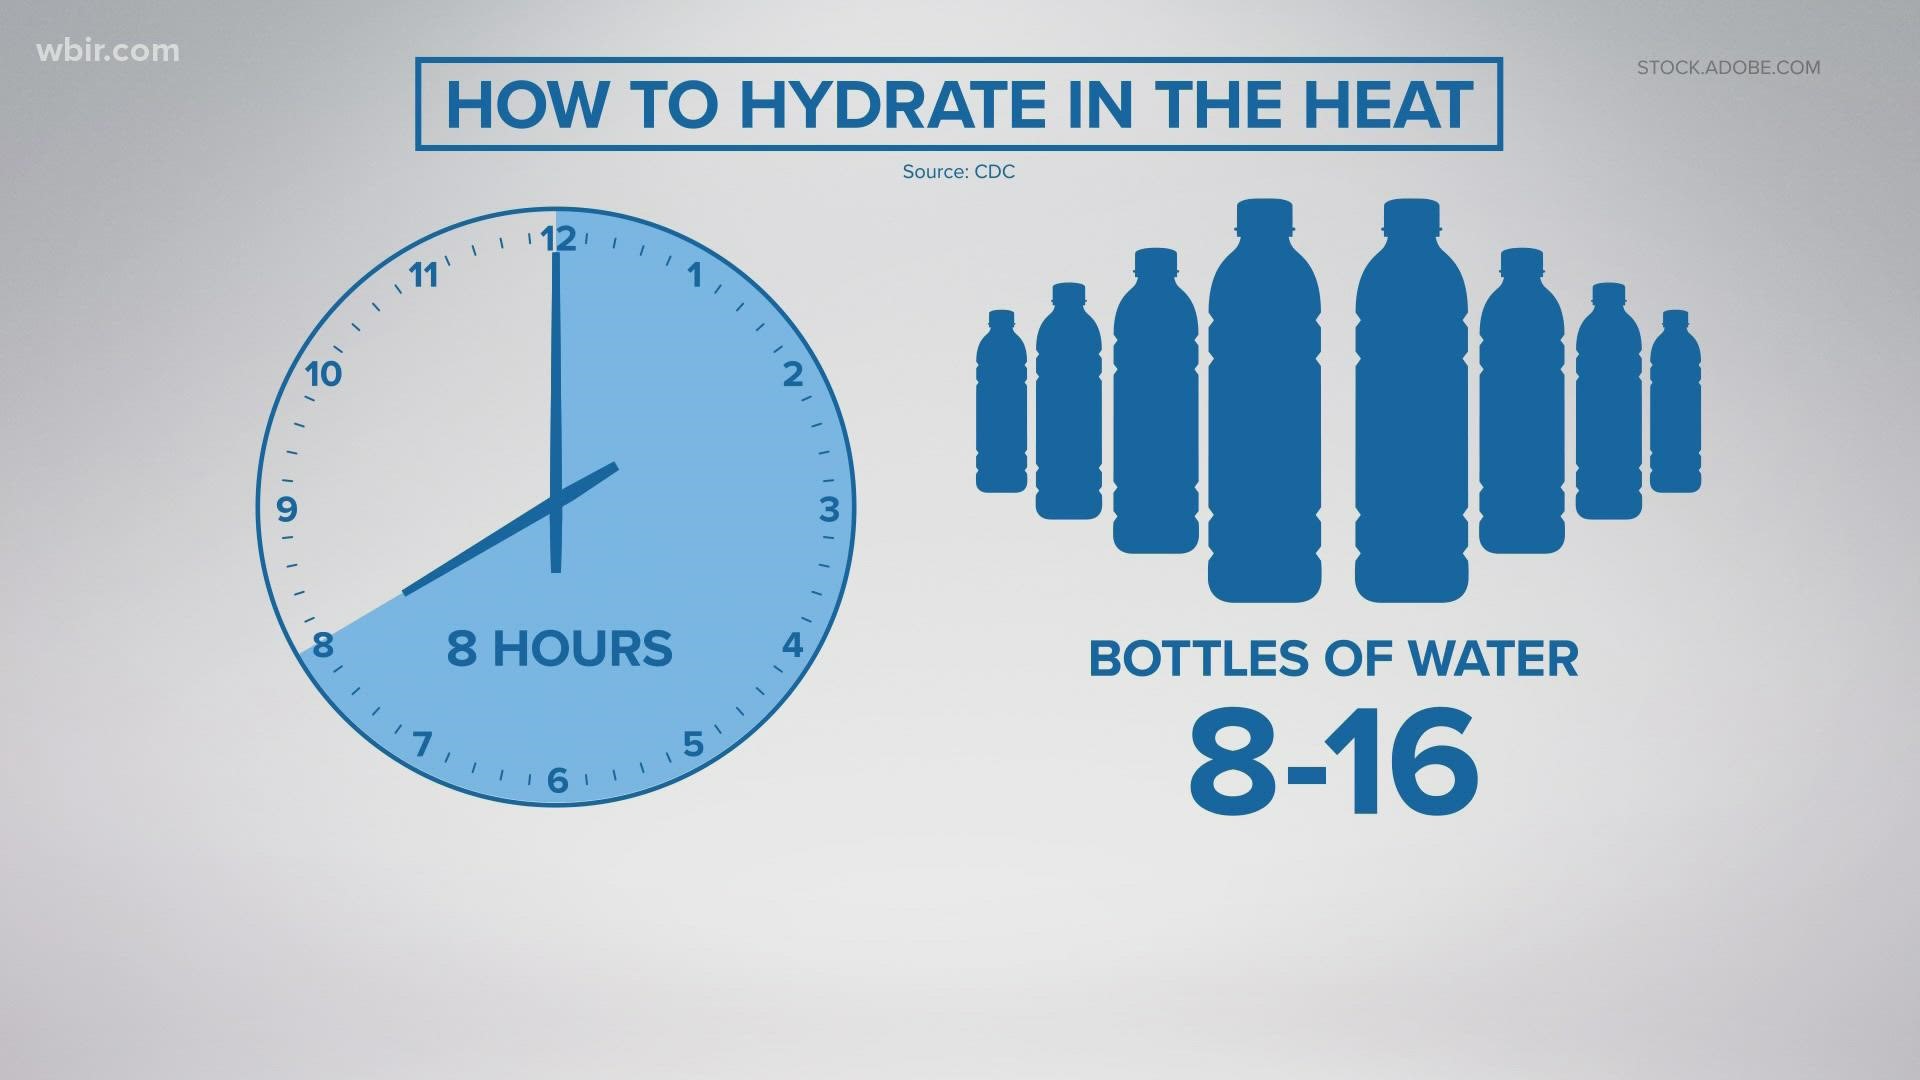 Dr. R. Michael Green said it's important to listen to your body when it's hot and humid outside, making sure to drink enough water.